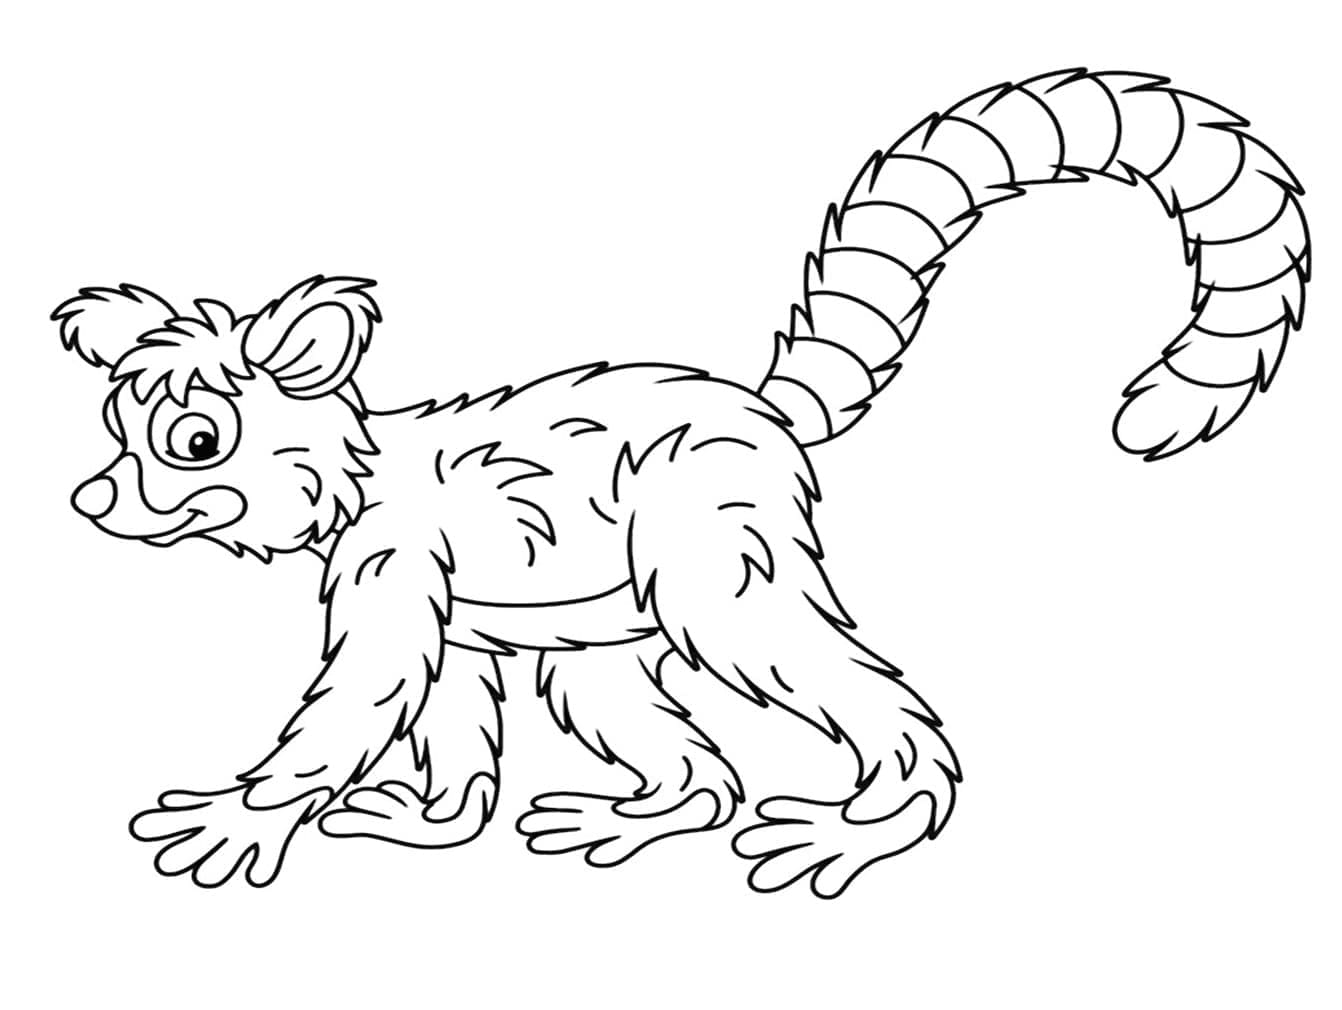 Smiling Lemur coloring page - Download, Print or Color Online for Free